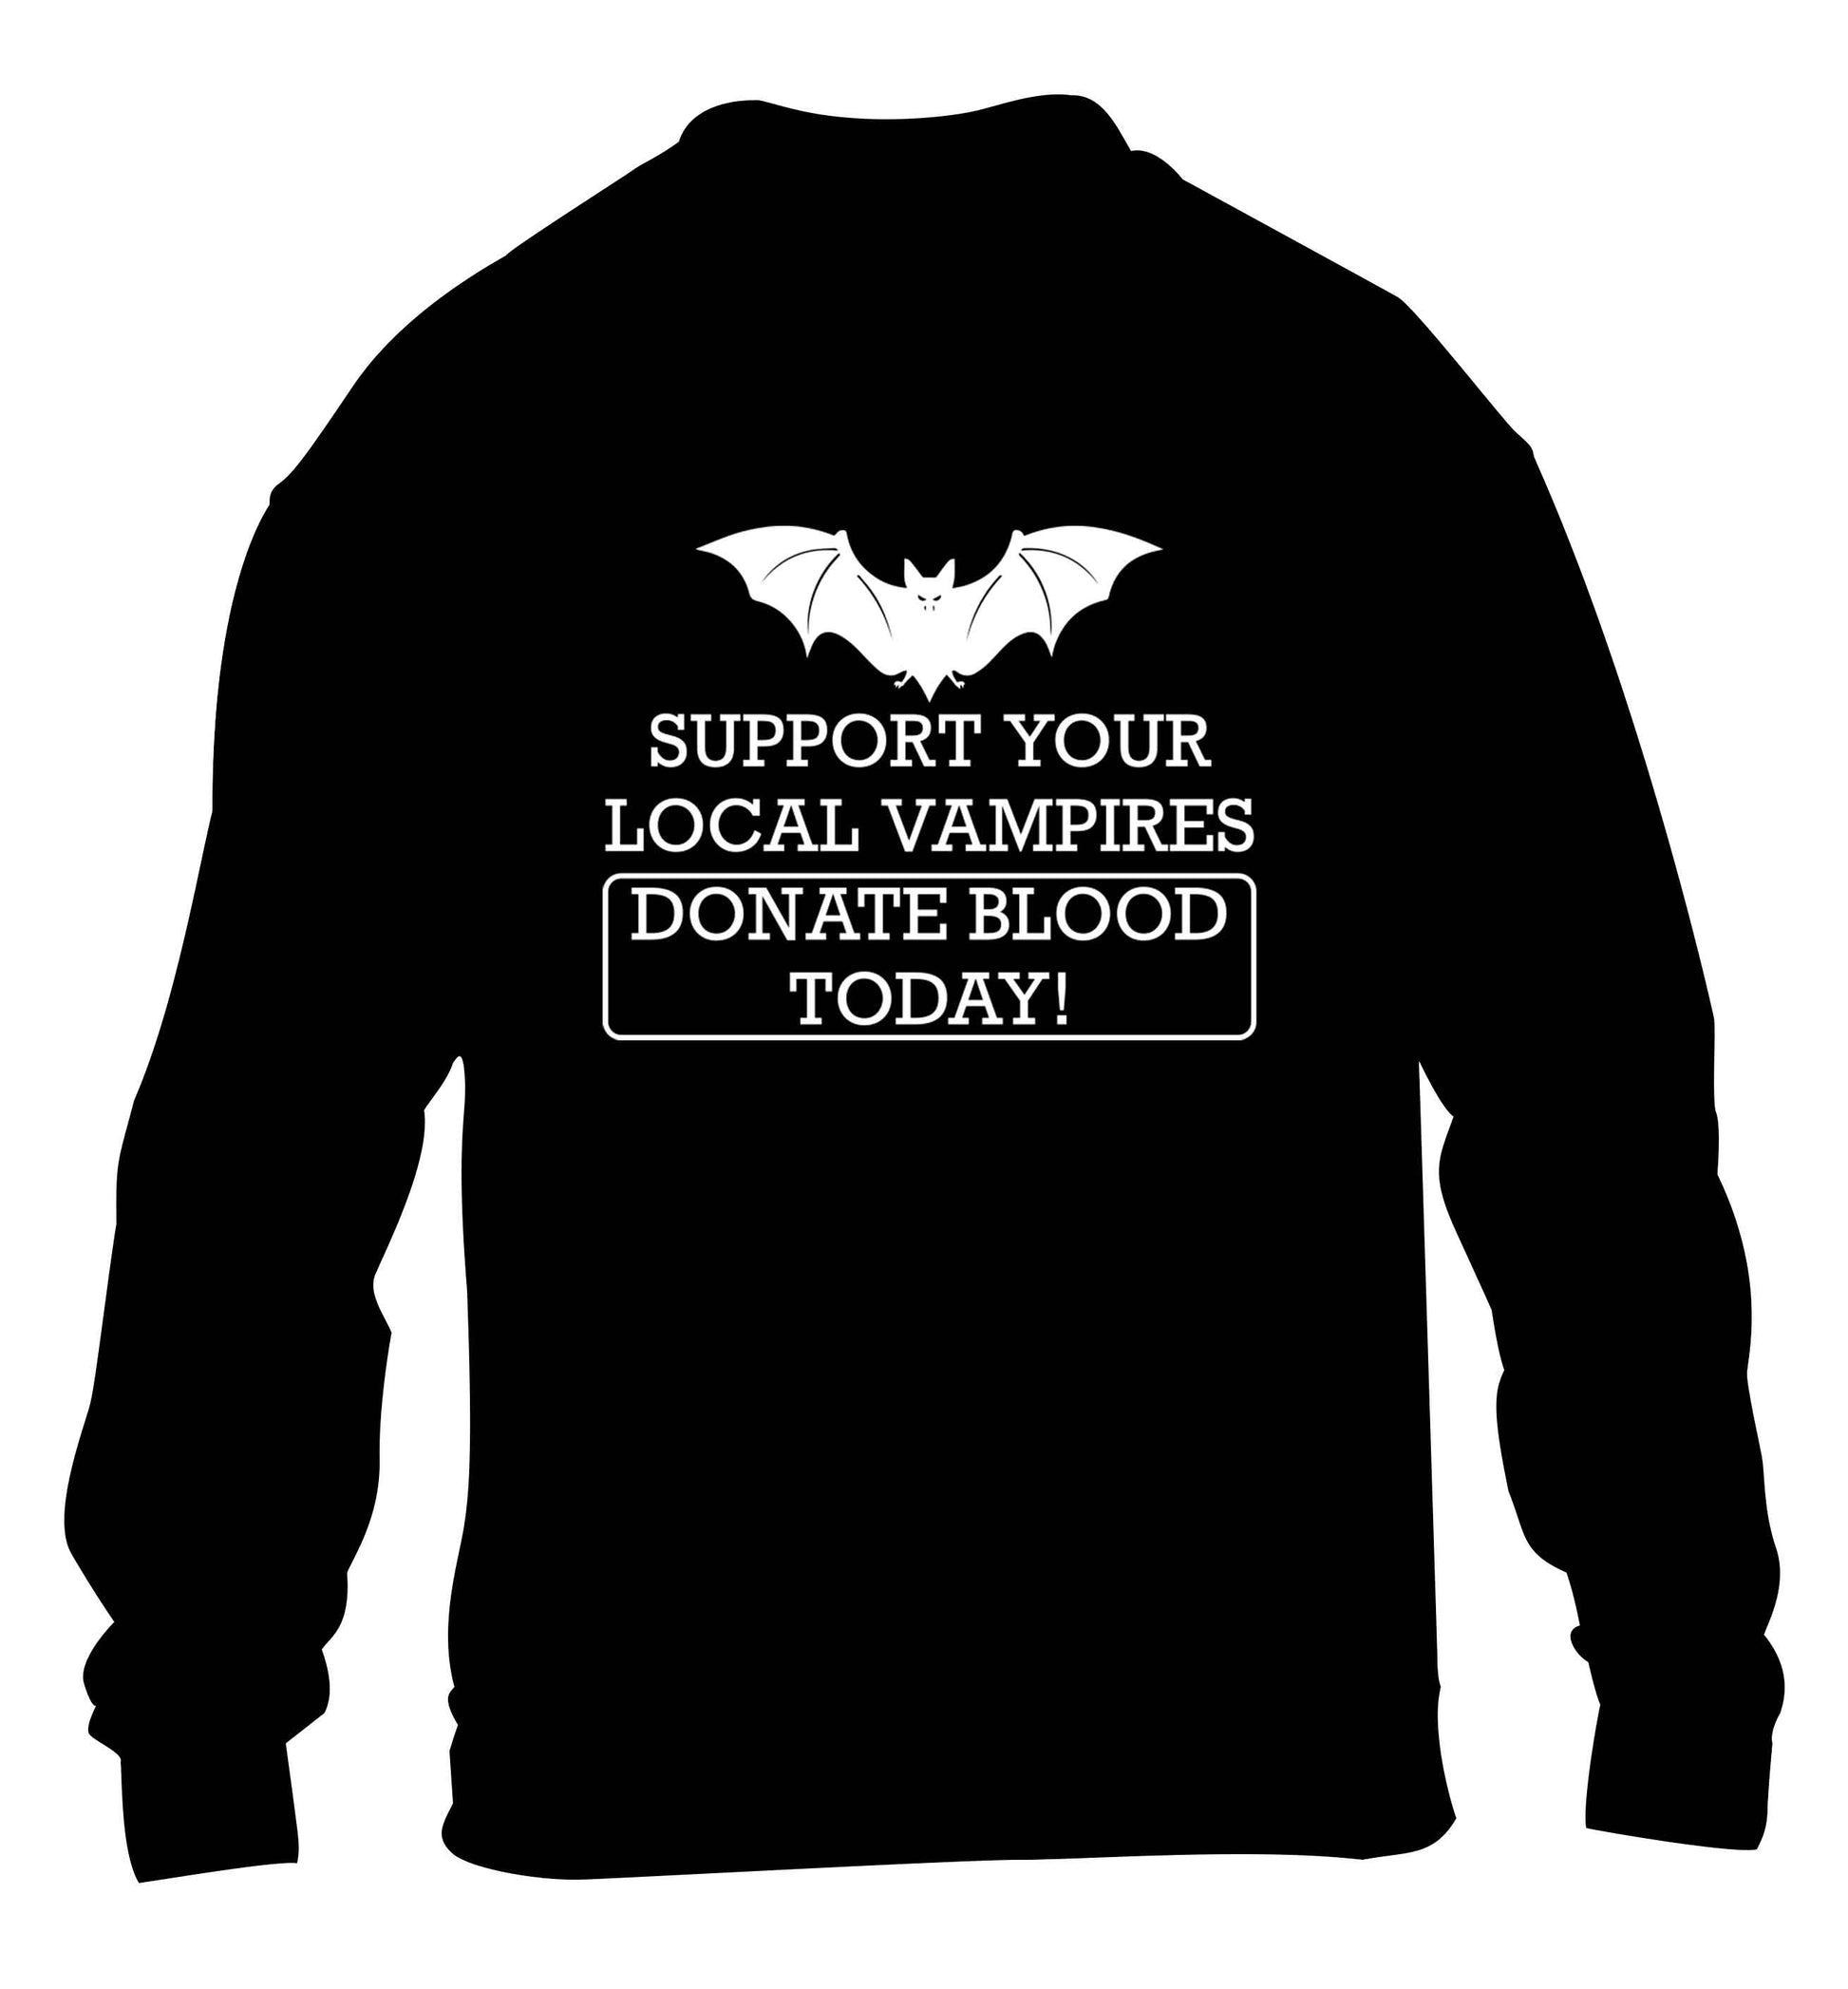 Support your local vampires donate blood today! children's black sweater 12-13 Years